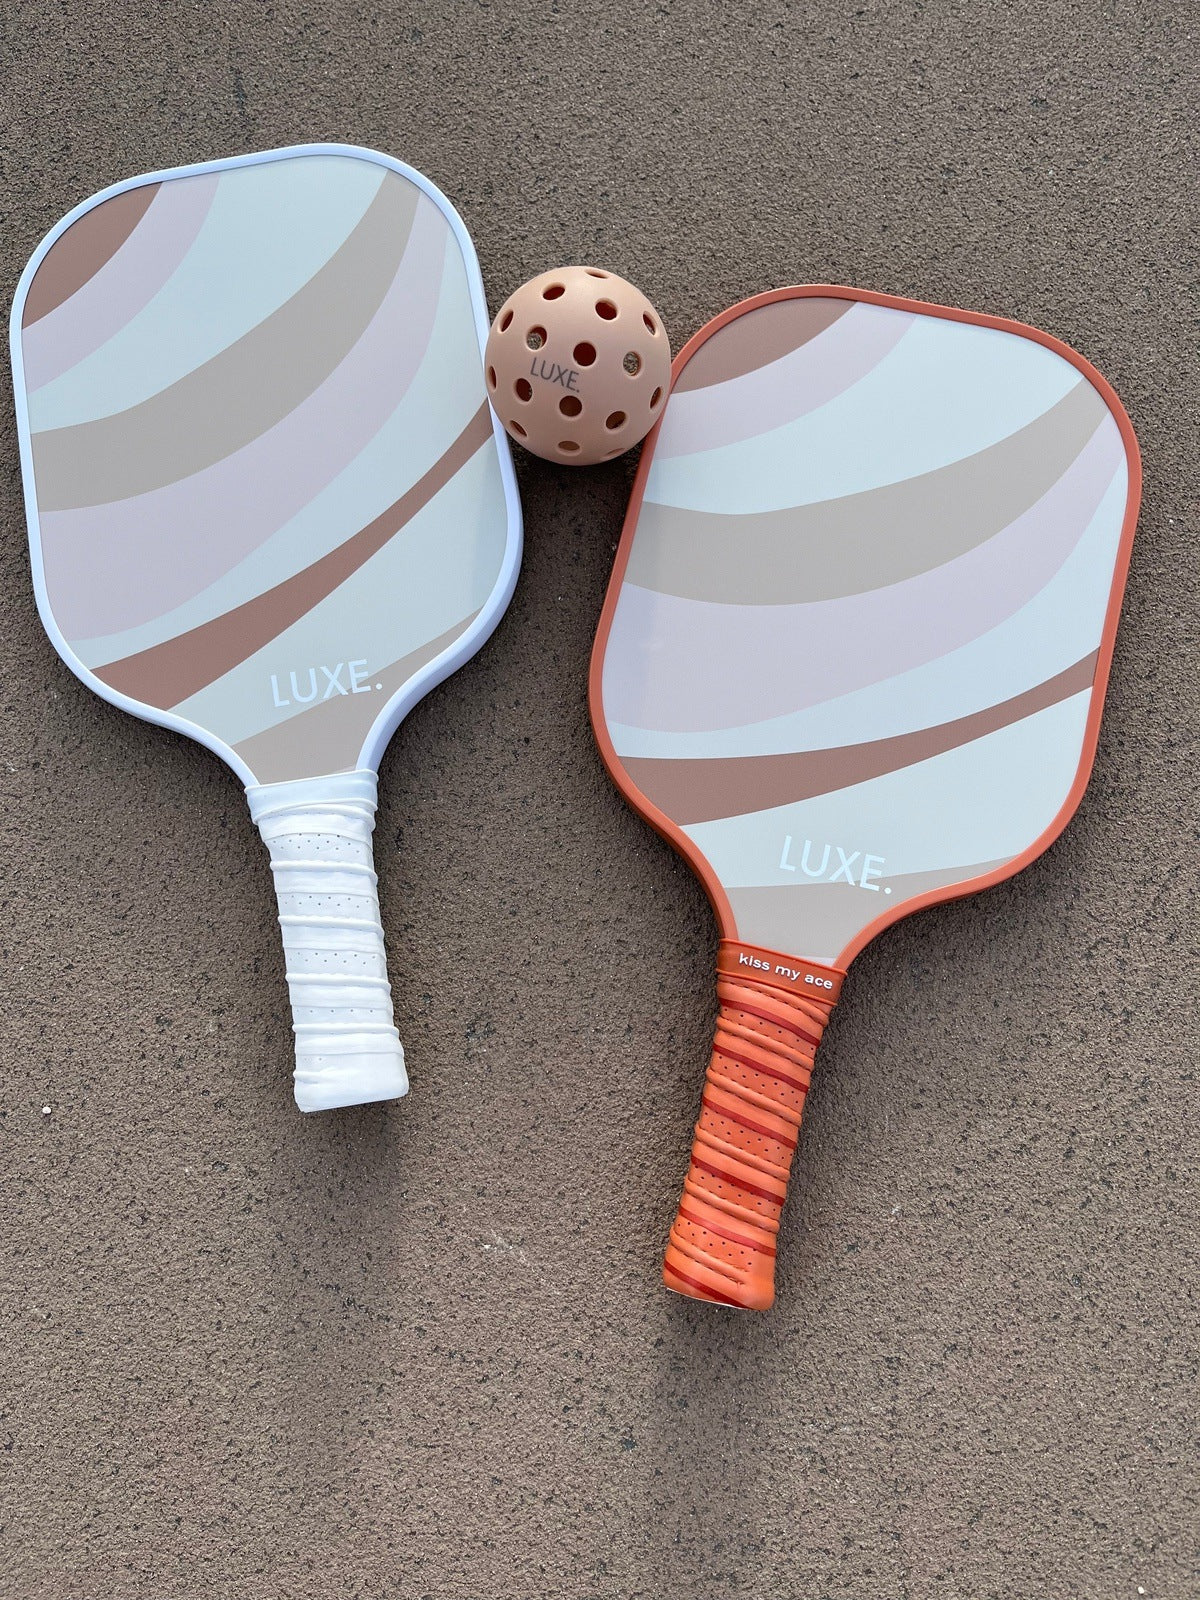 Pink and Rust LUXE Pickleball Paddle. Cute and aesthetic pickleball paddles